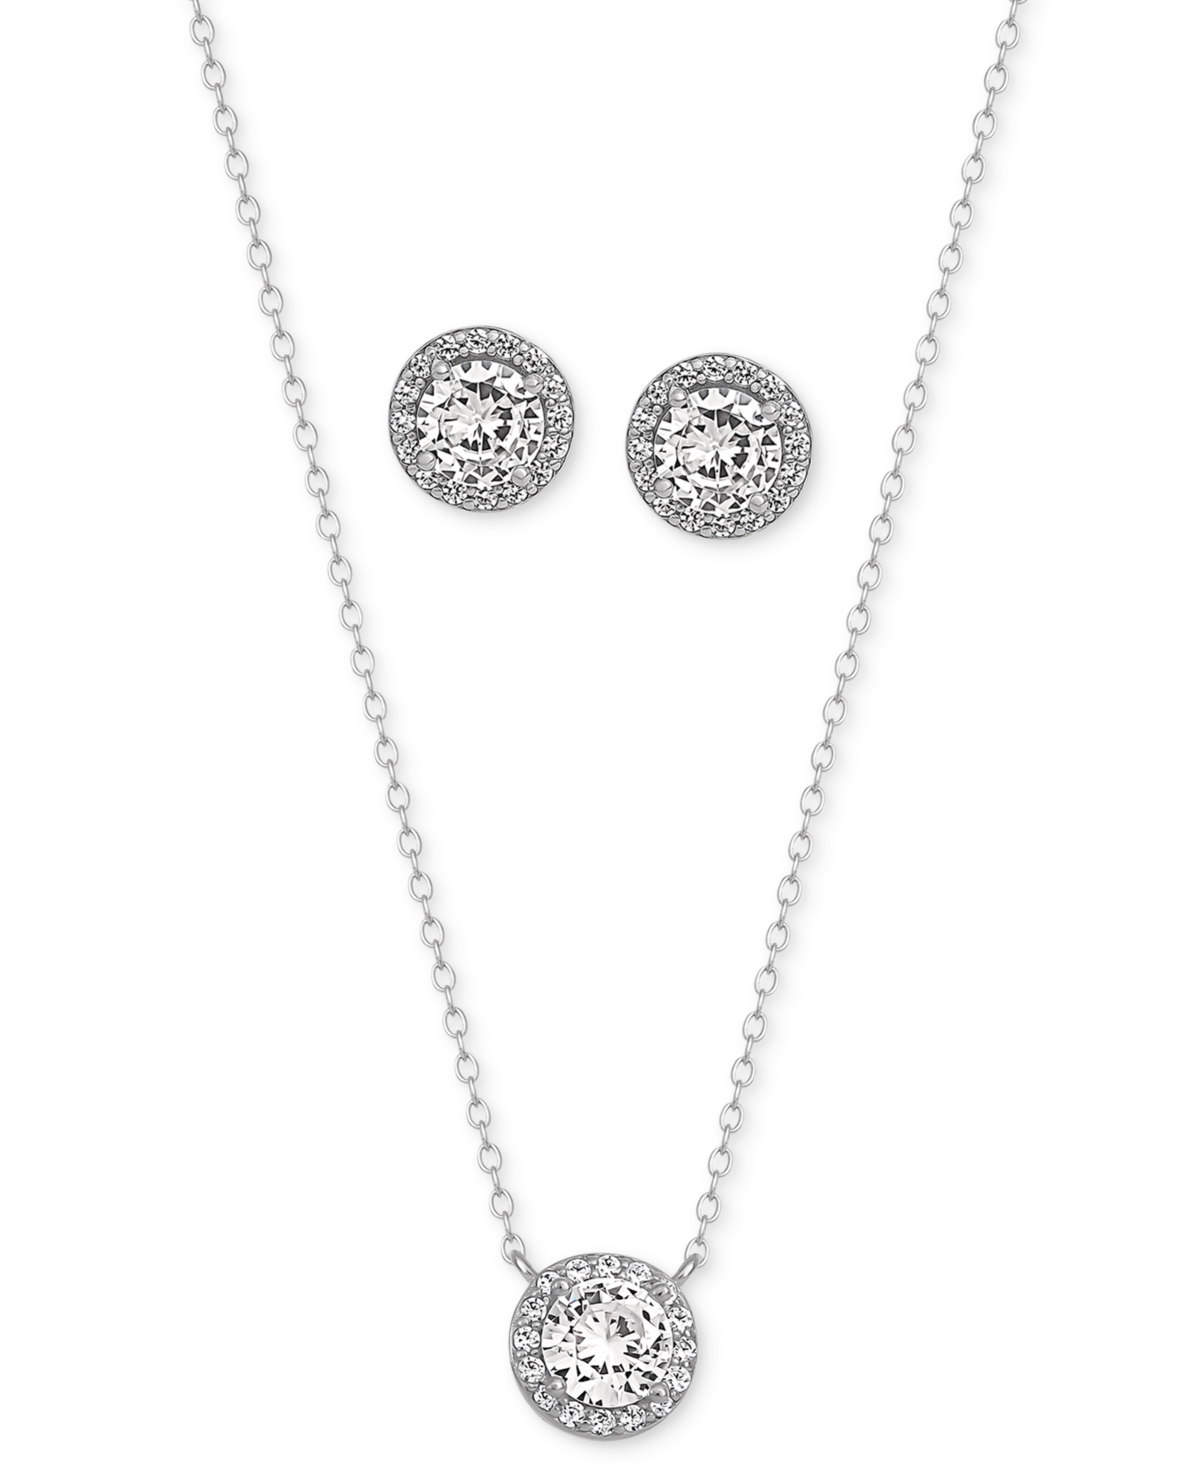 GIANI BERNINI STERLING SILVER CUBIC ZIRCONIA NECKLACE AND EARRINGS